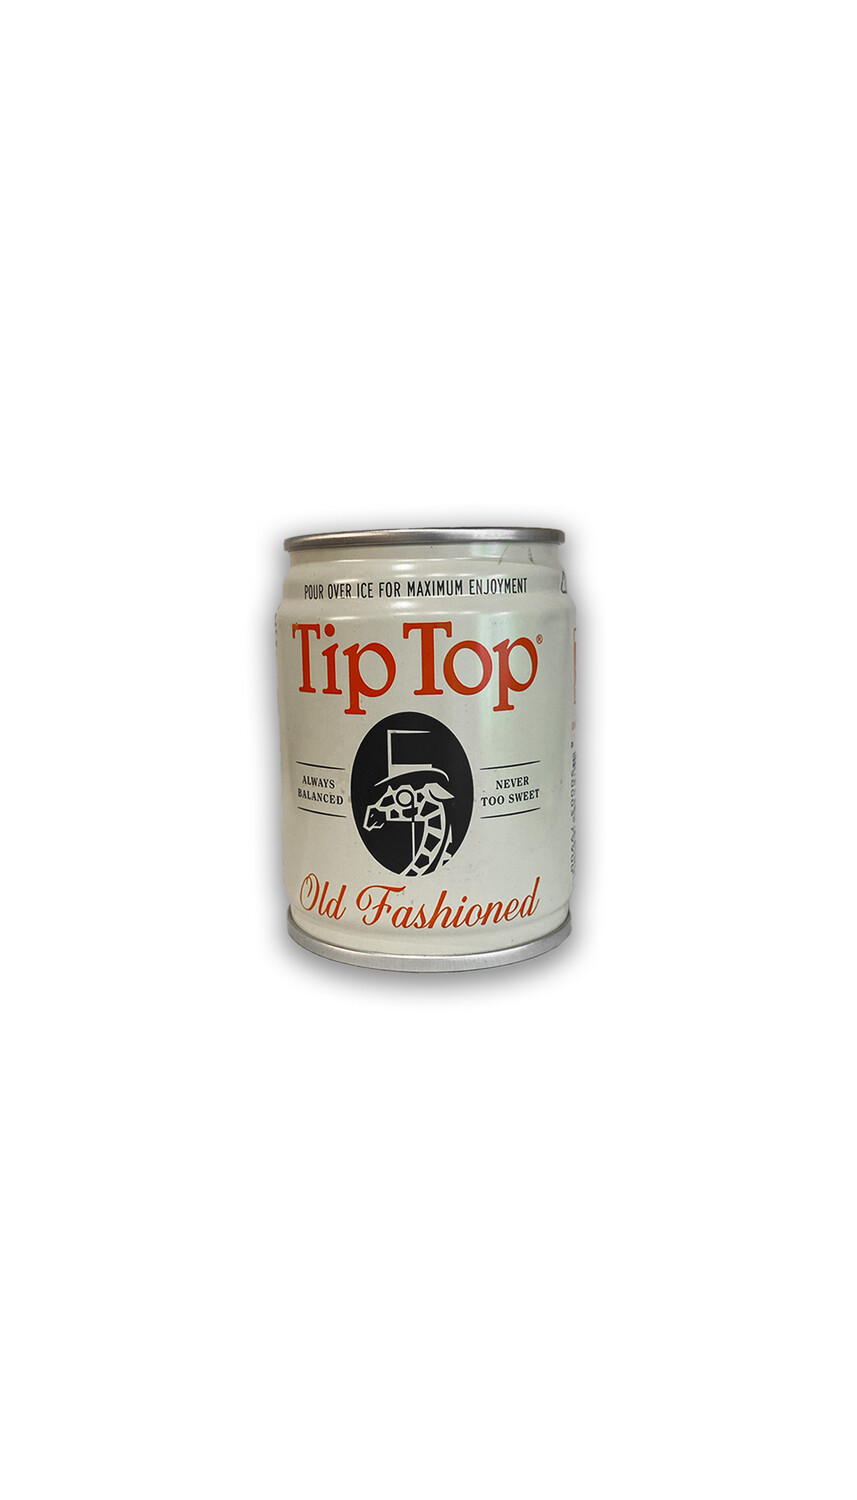 Tip Top Old fashioned